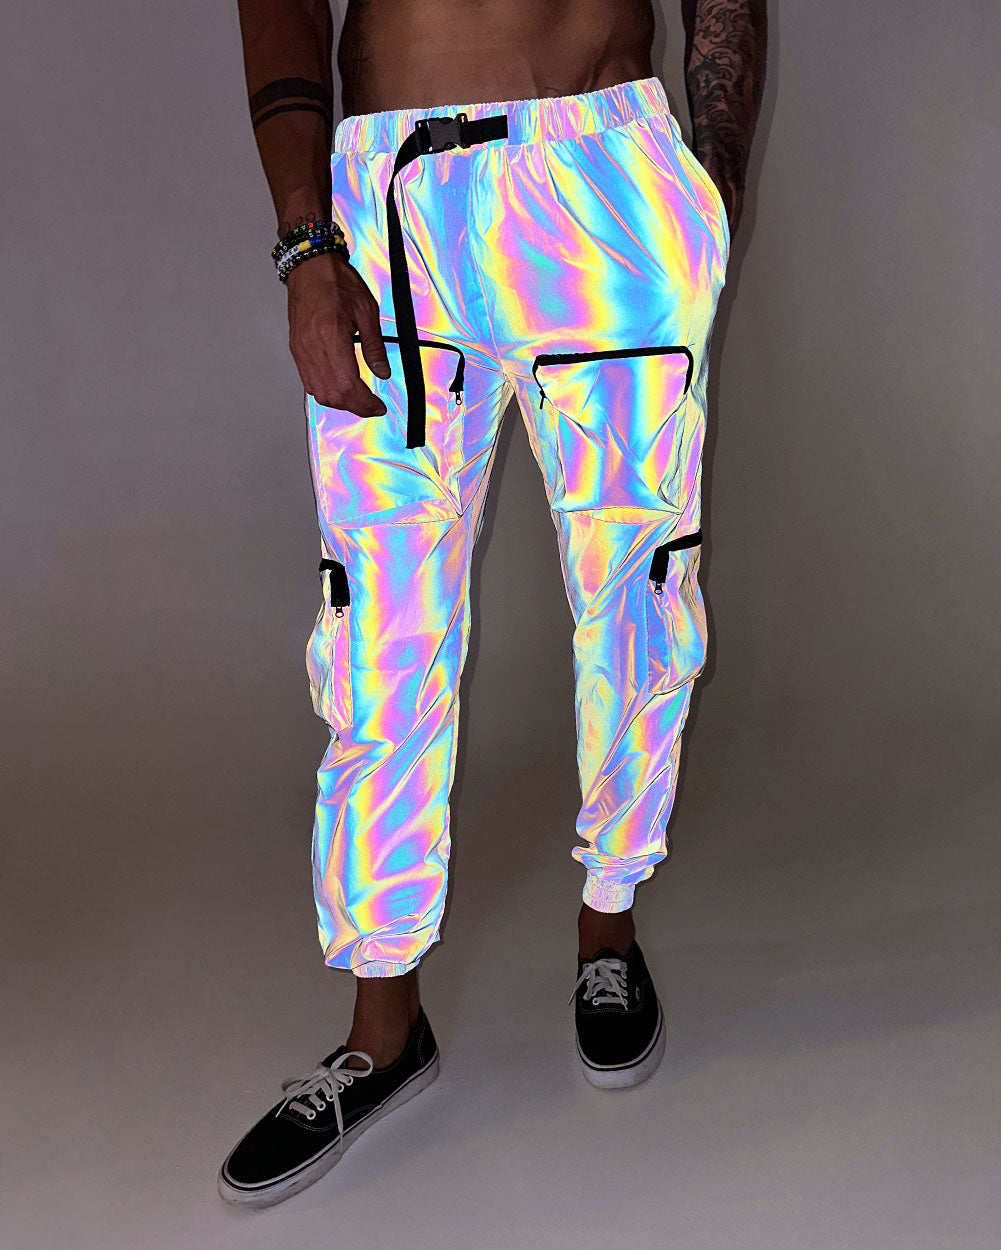  Door Wreath Reflective Pants, Big and Tall Sweatpants for Men,  Rainbow Jogger Pants Holographic Trousers for Boy (Color : XXXL) :  Clothing, Shoes & Jewelry